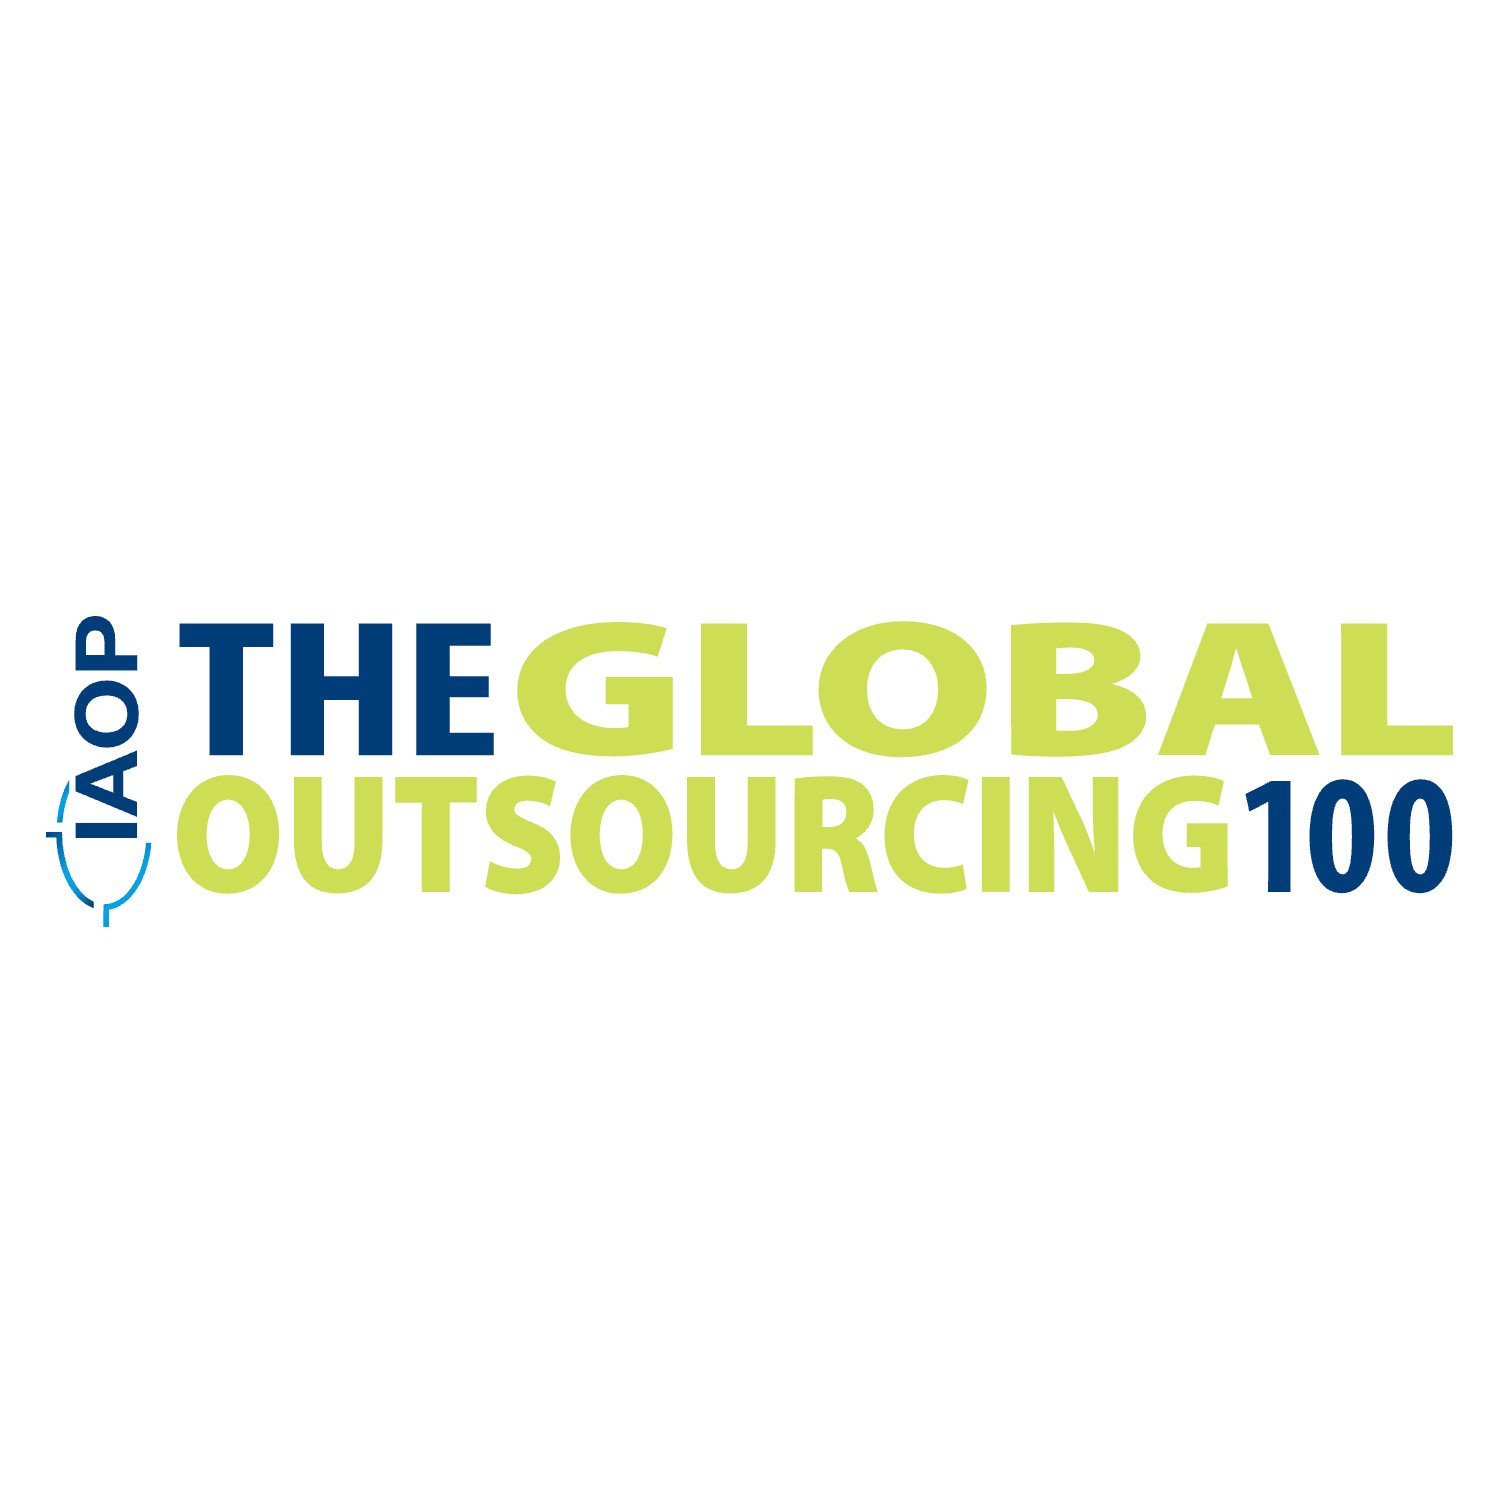 IAOP Names SEBPO to The Global Outsourcing 100® List for the Ninth Year in a Row